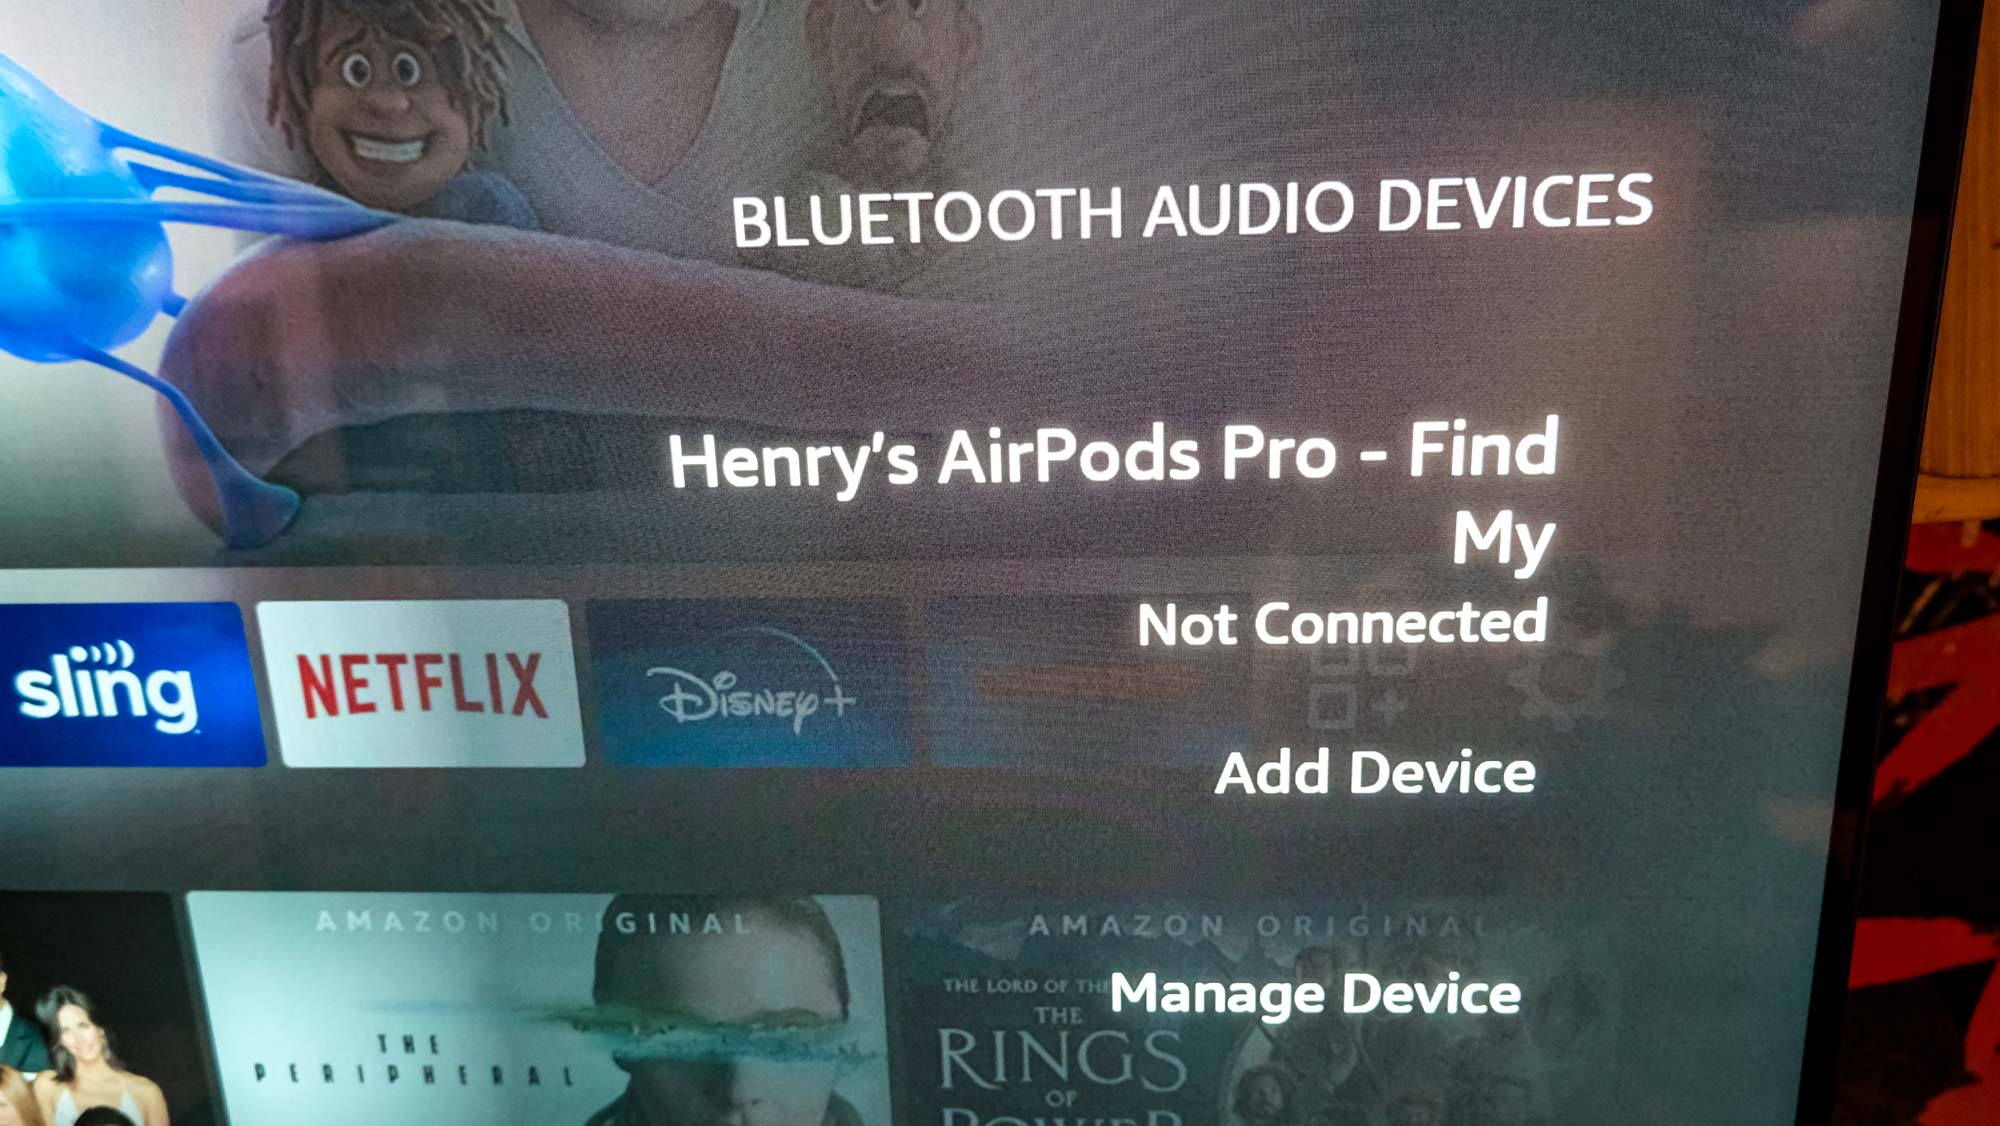 Fire TV's Wireless Devices menu triggered by the Alexa Voice Remote ProThe Alexa Voice Remote Pro